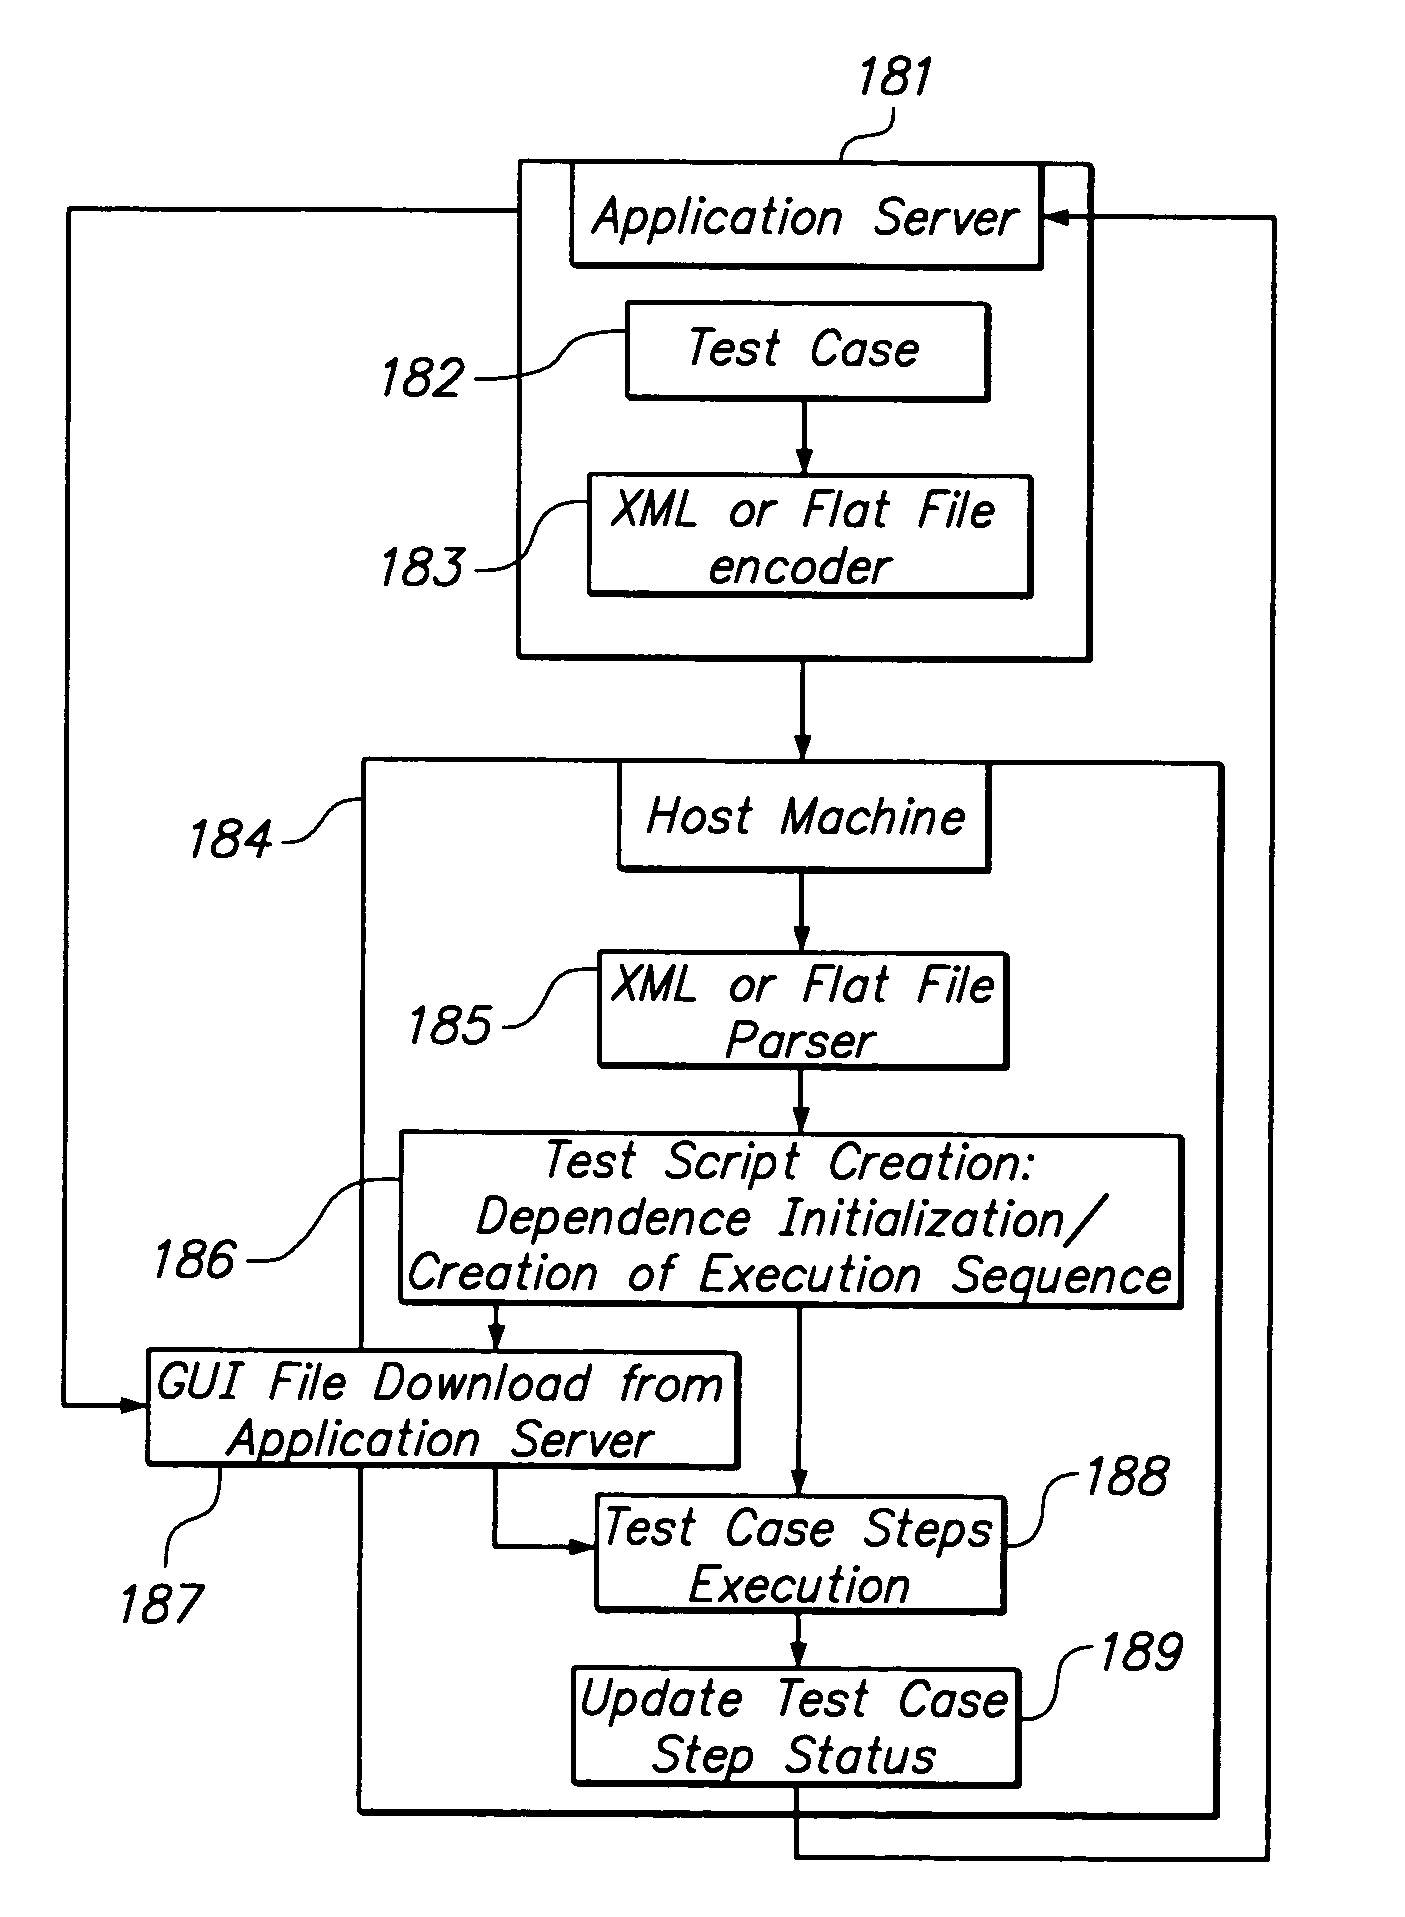 Web-interactive software testing management method and computer system including an integrated test case authoring tool